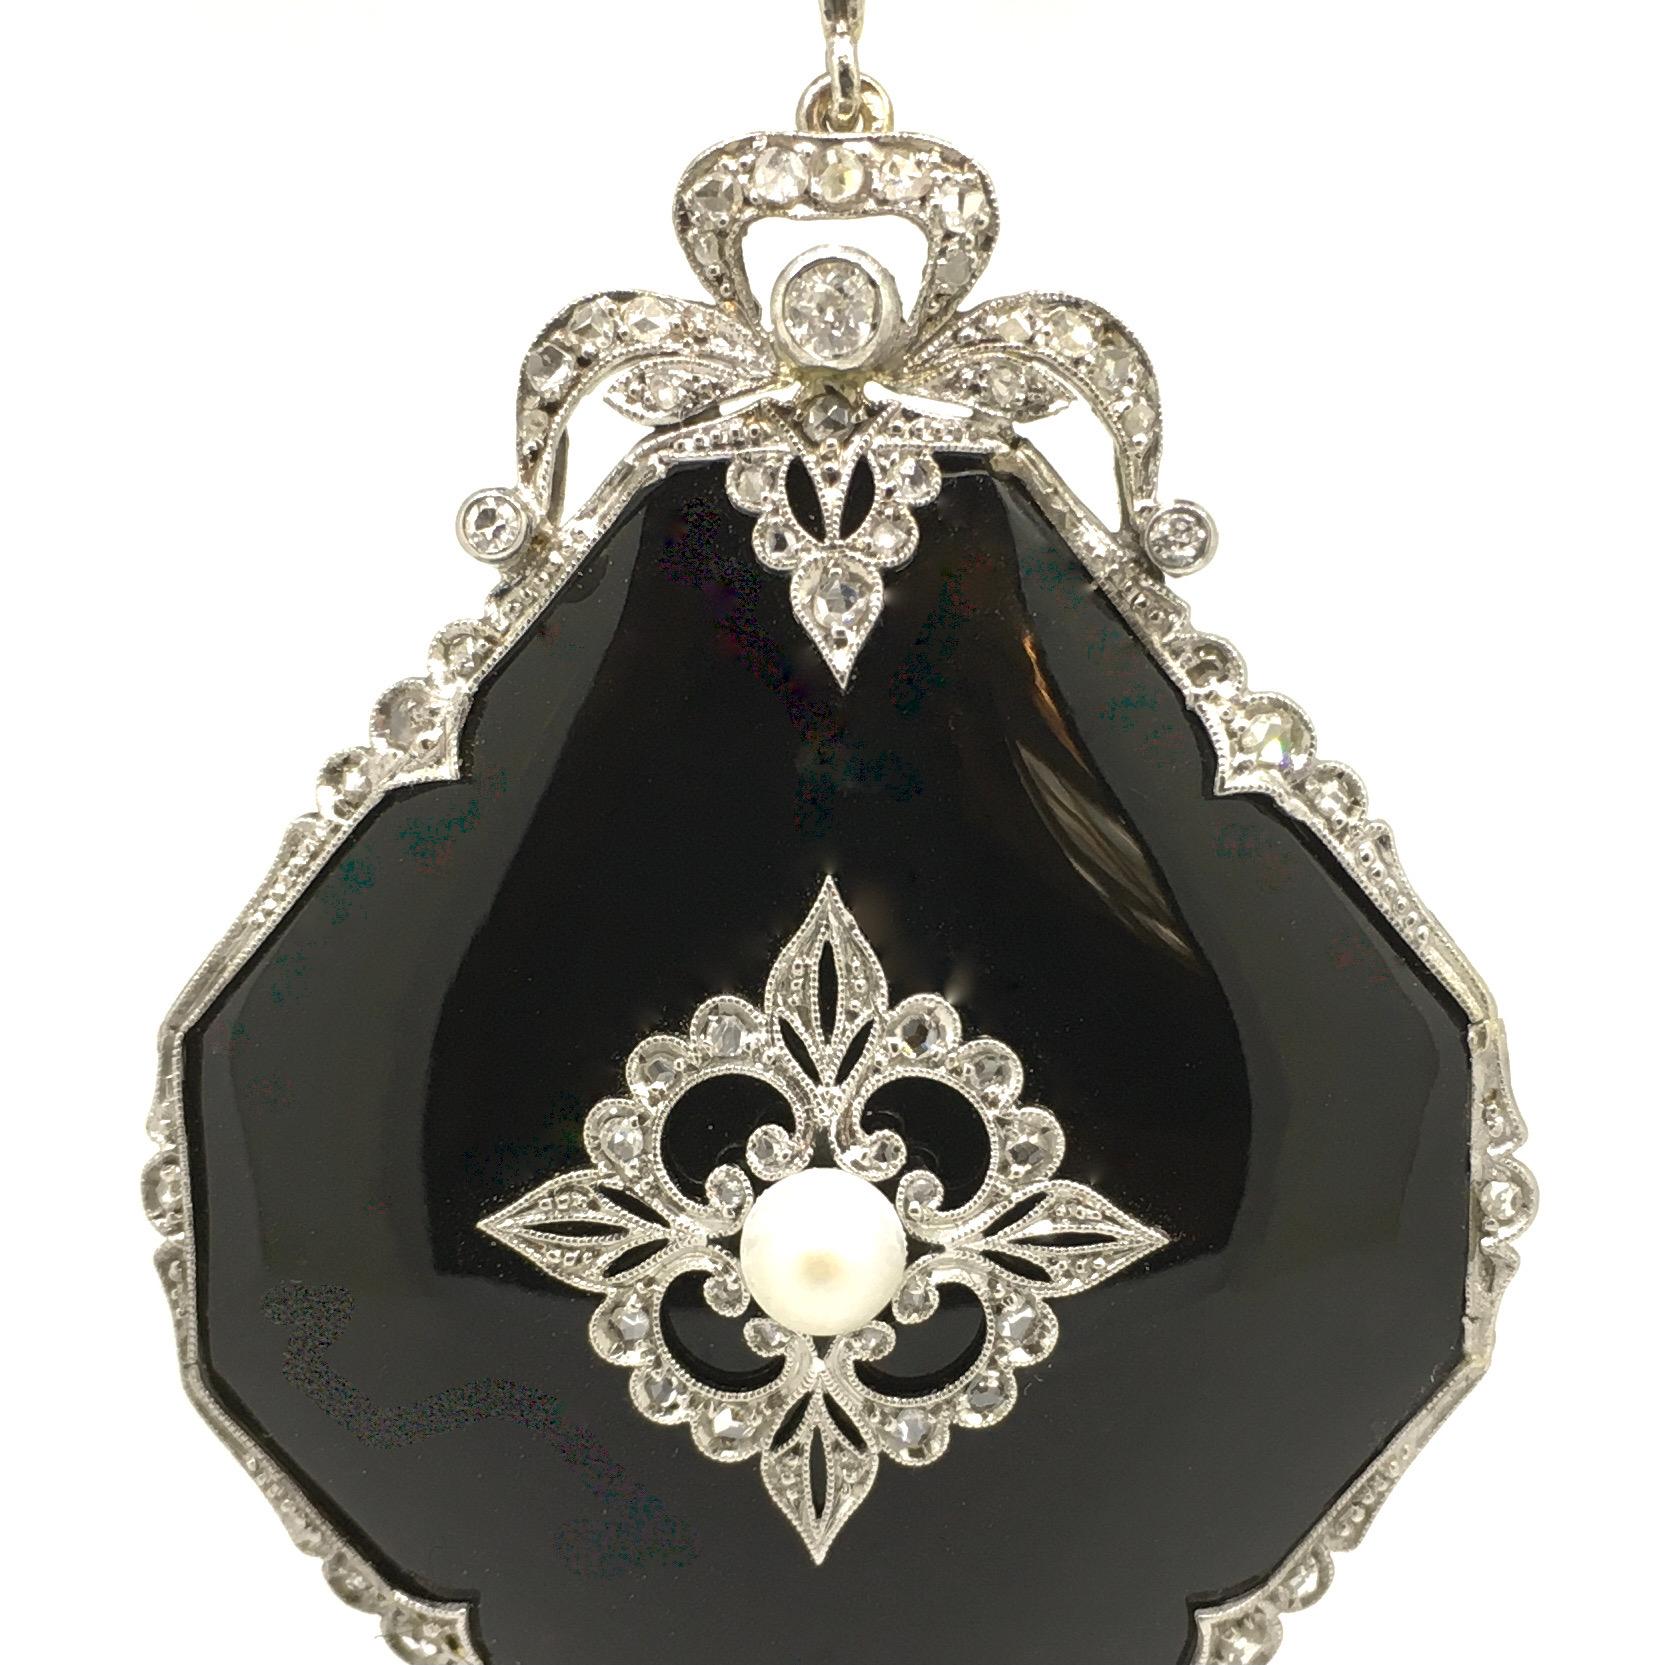 Pendant, Platinum, Belle Epoque, Onyx, Diamond total 0,94 carat.
Measuring 70 mm., long (including the diamond-set loop), this pristine and strikingly stunning French Belle Epoque jewel (circa 1900) is hand-crafted in platinum and features a glossy